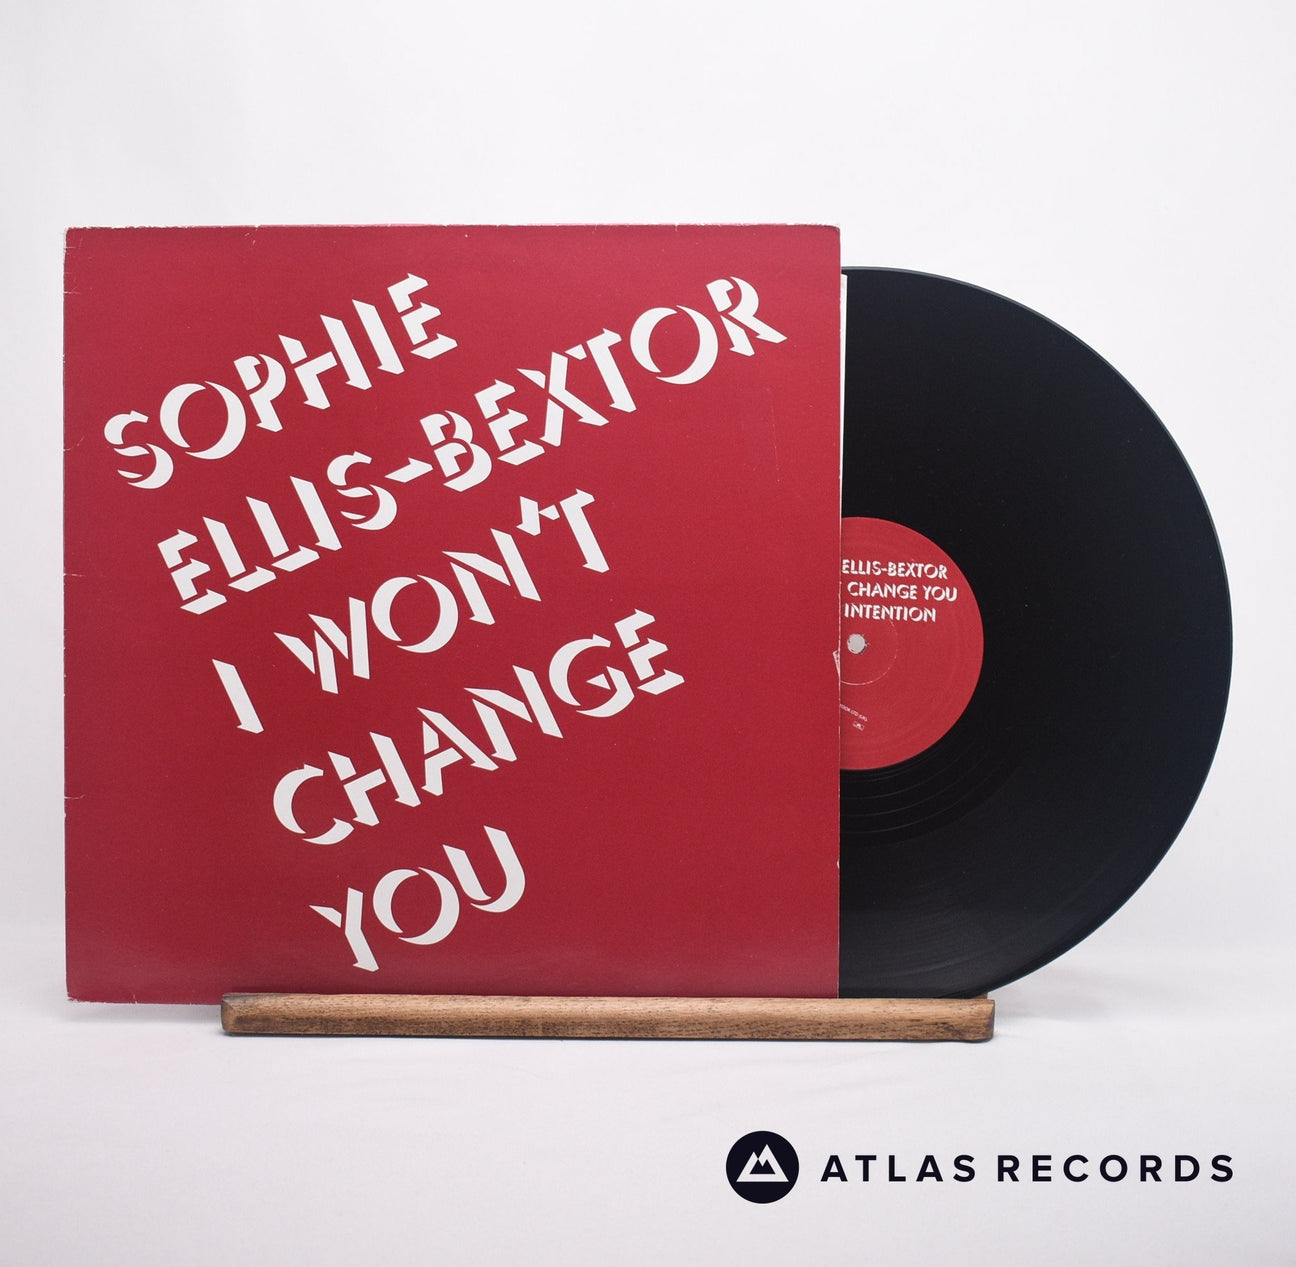 Sophie Ellis-Bextor I Won't Change You 12" Vinyl Record - Front Cover & Record